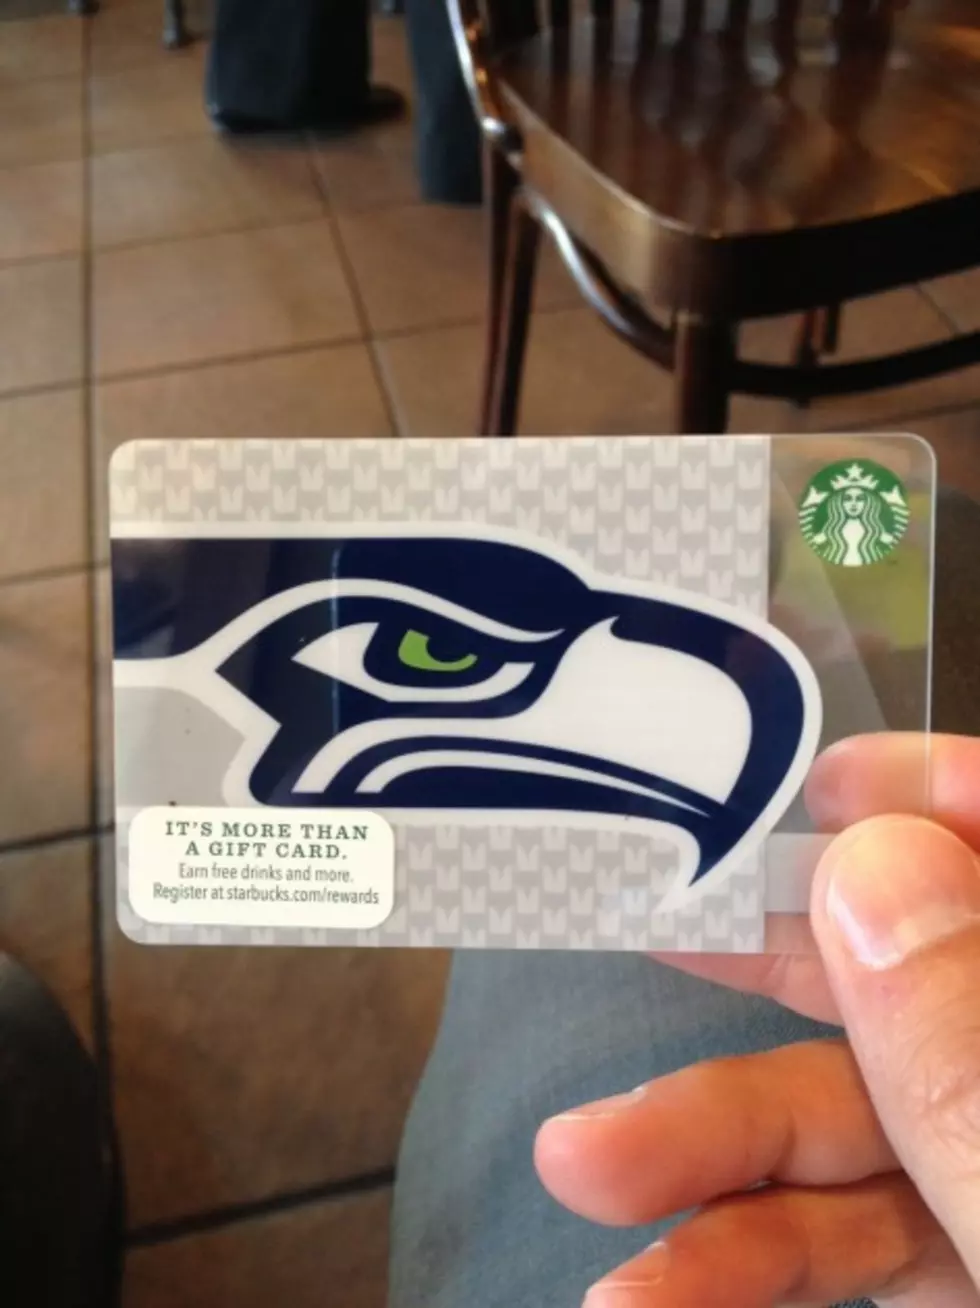 Starbucks and the Seattle Seahawks are kicking off a new partnership this football season